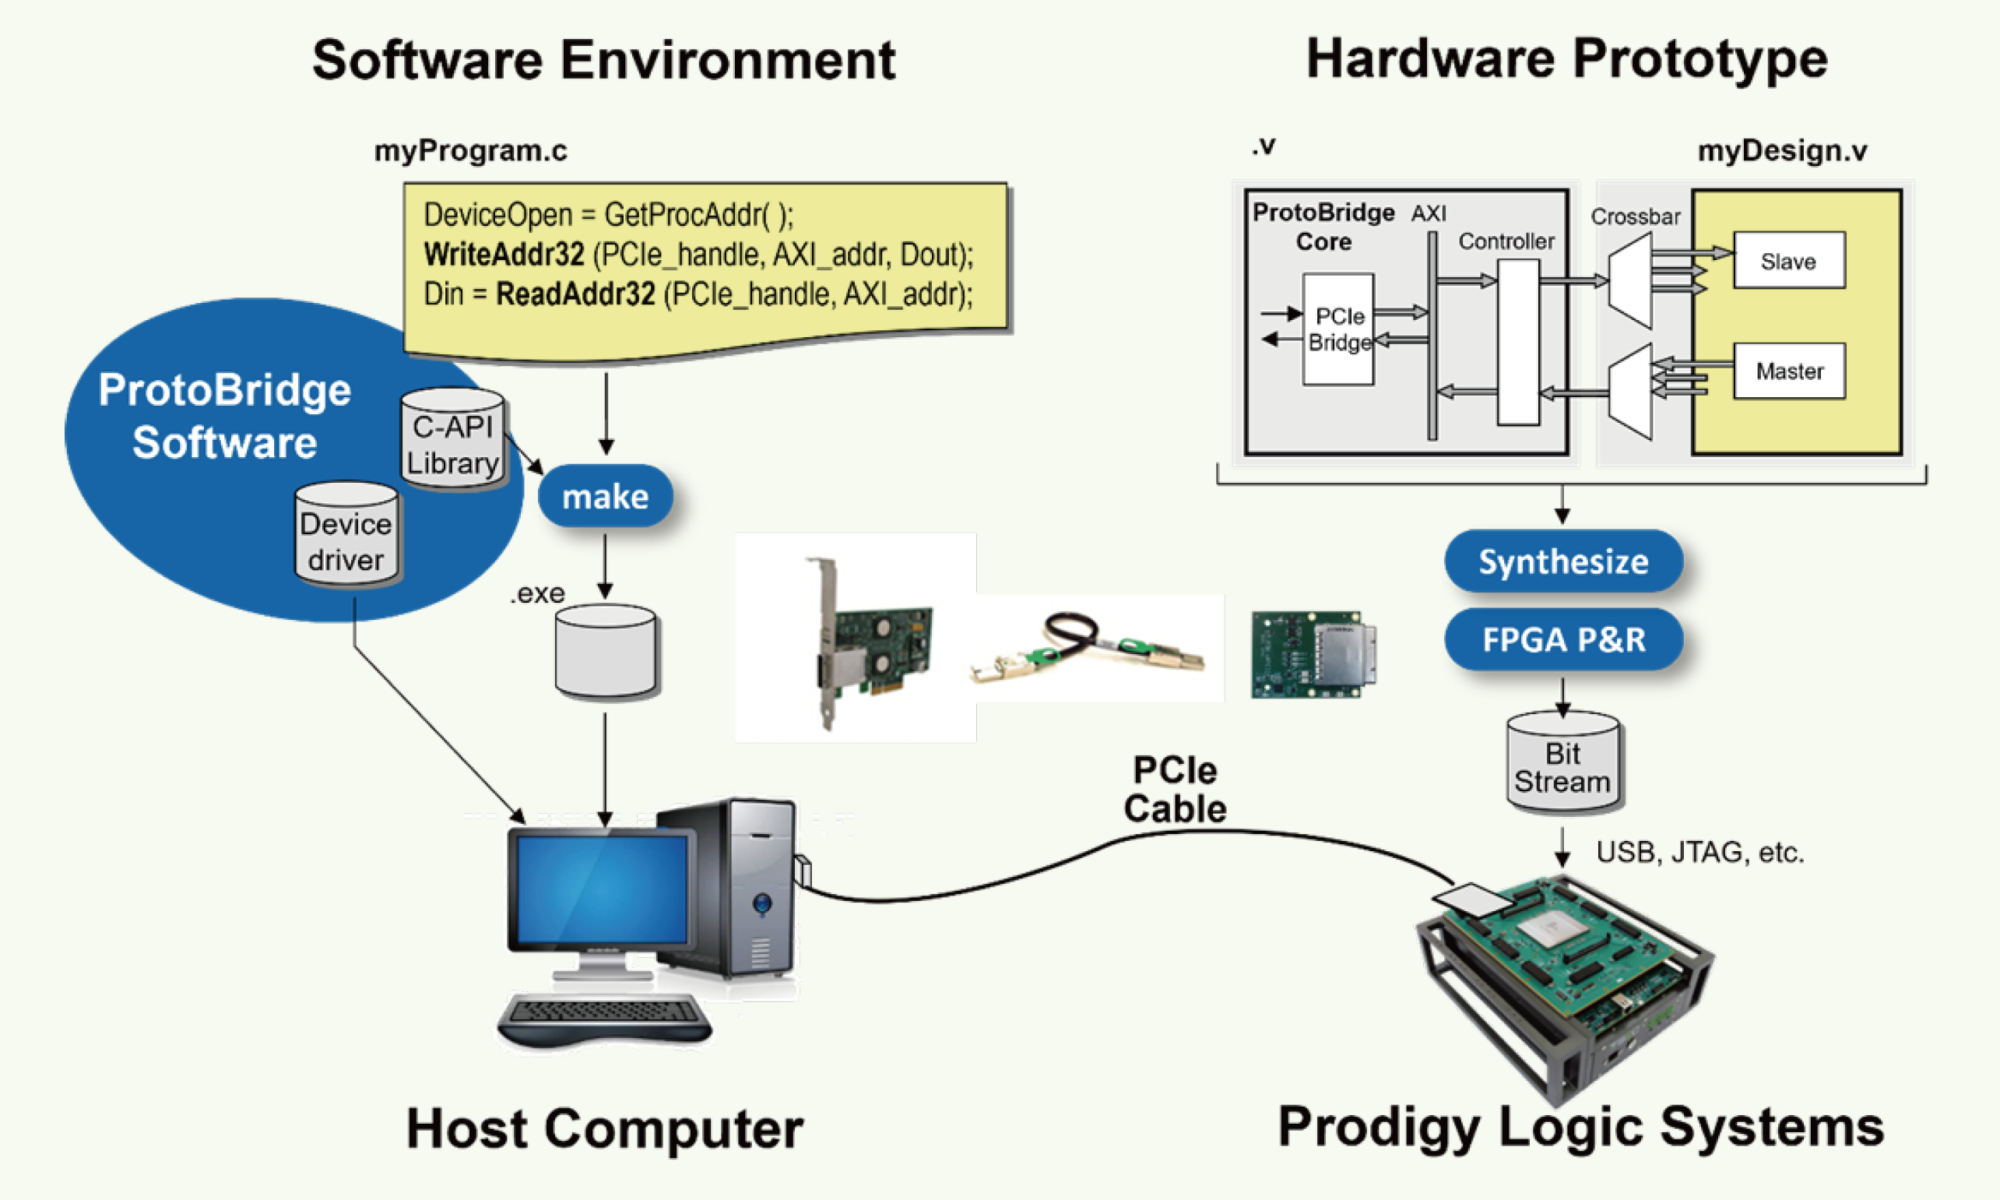 ProtoBridge from S2C provides a high bandwidth prototyping device-unider-test connection